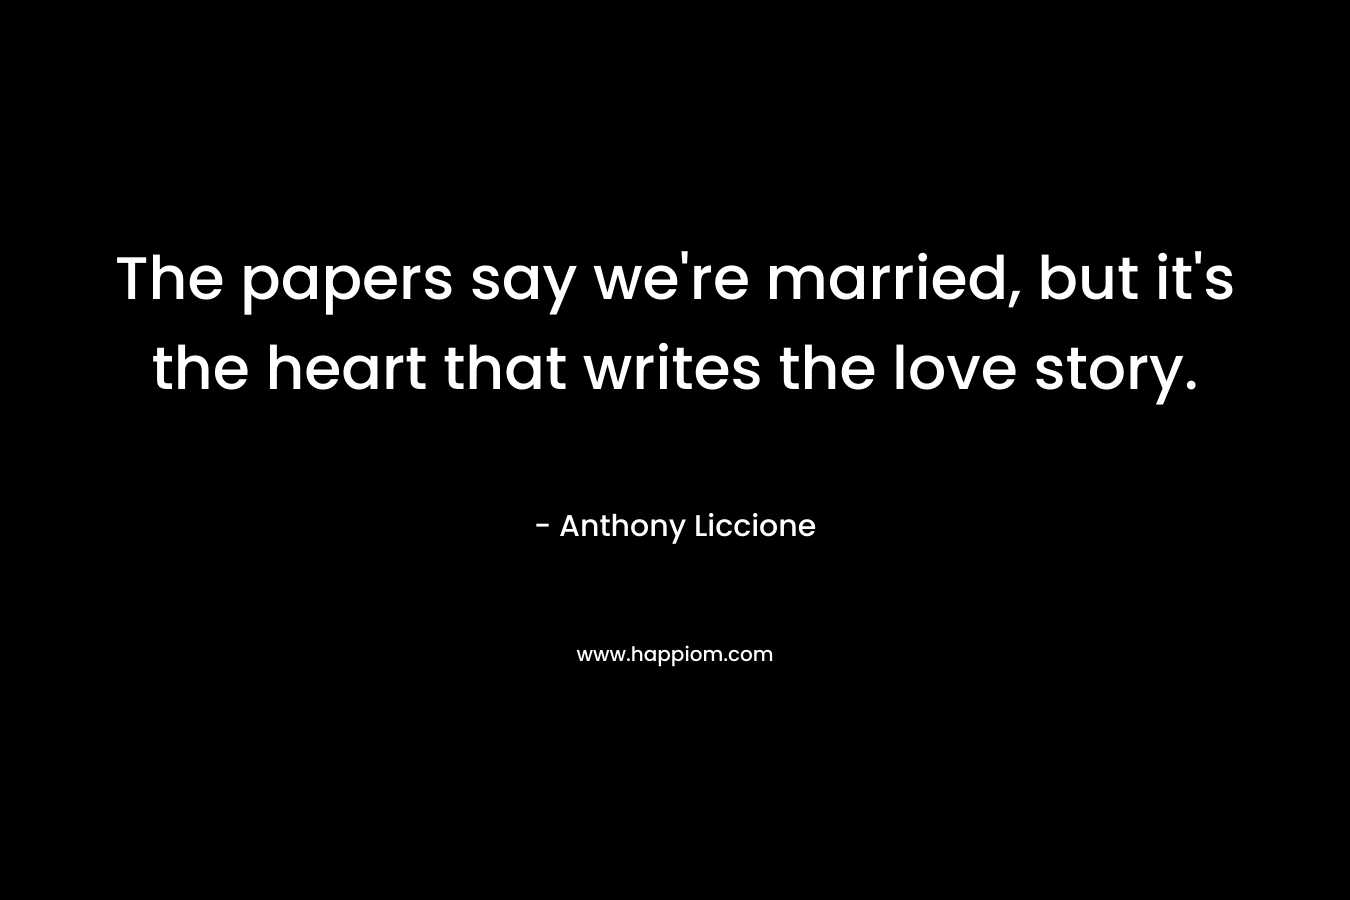 The papers say we're married, but it's the heart that writes the love story.